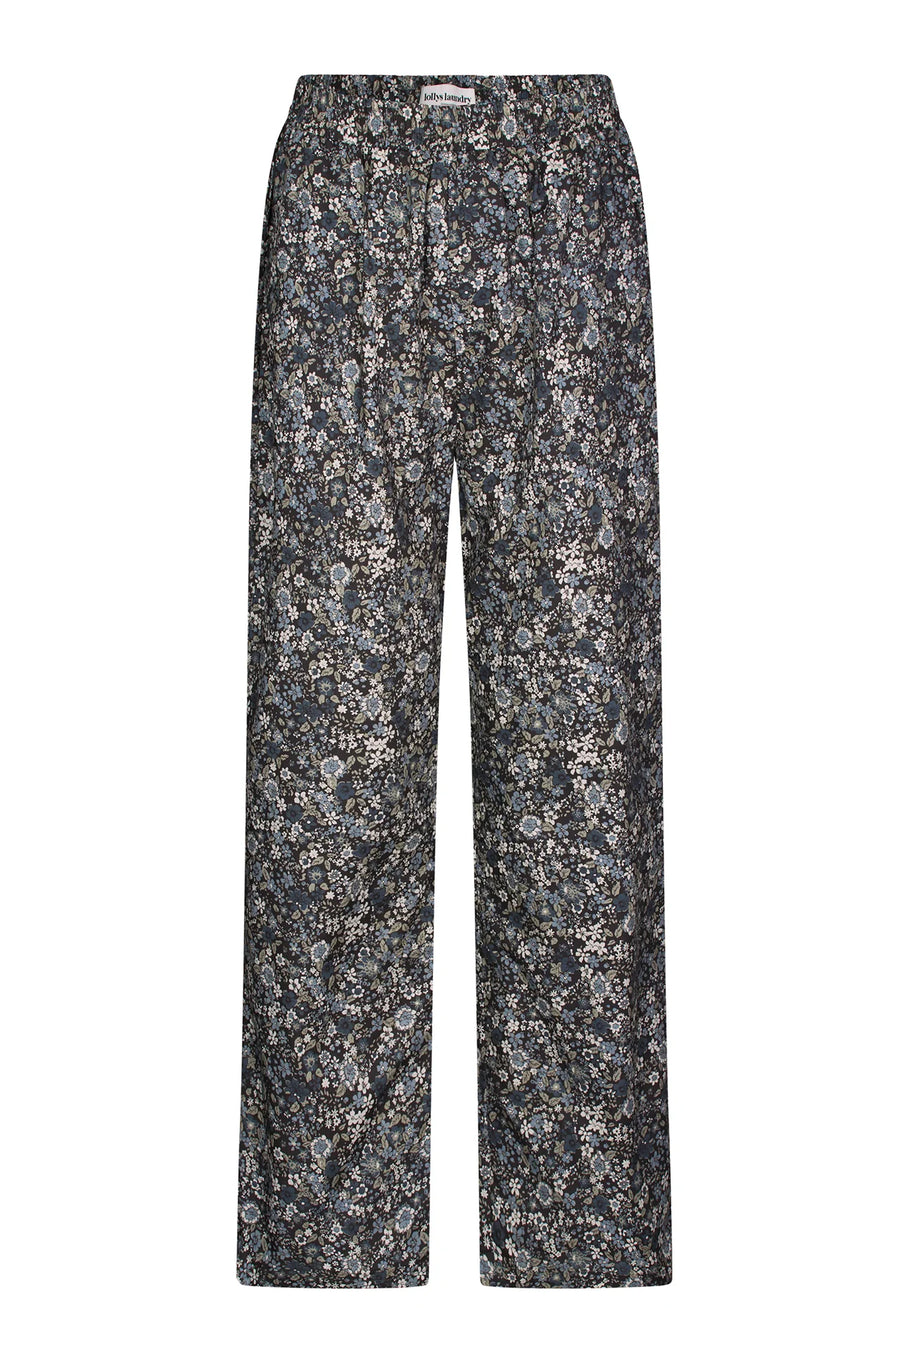 Lollys Laundry Bill Floral Cotton Trousers